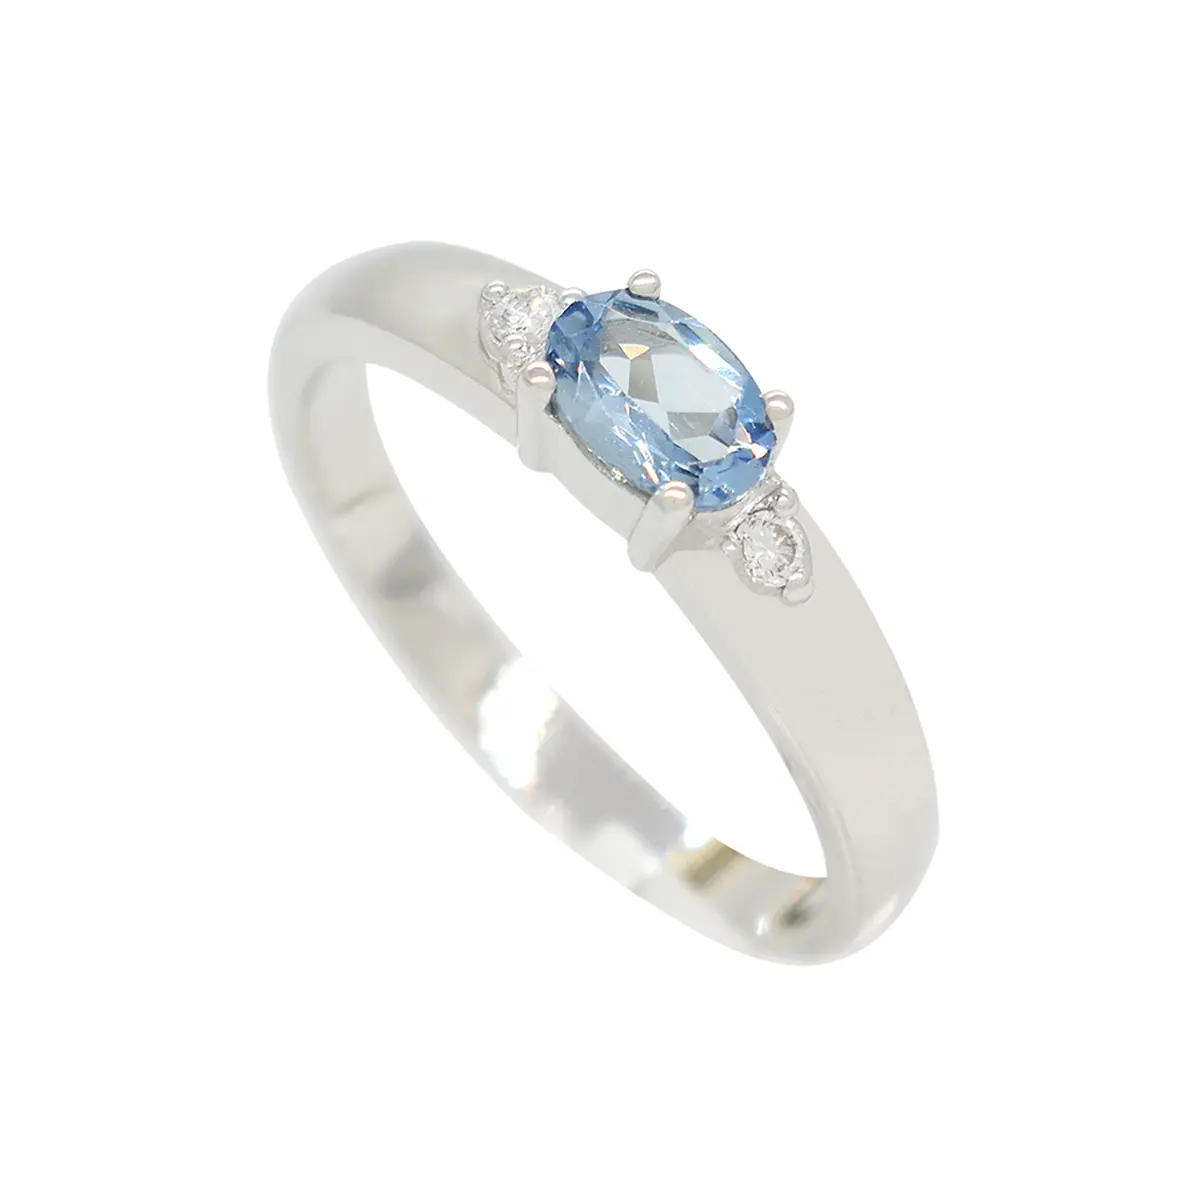 east-west-3-stones-aquamarine-and-diamond-ring-in-18k-white-gold